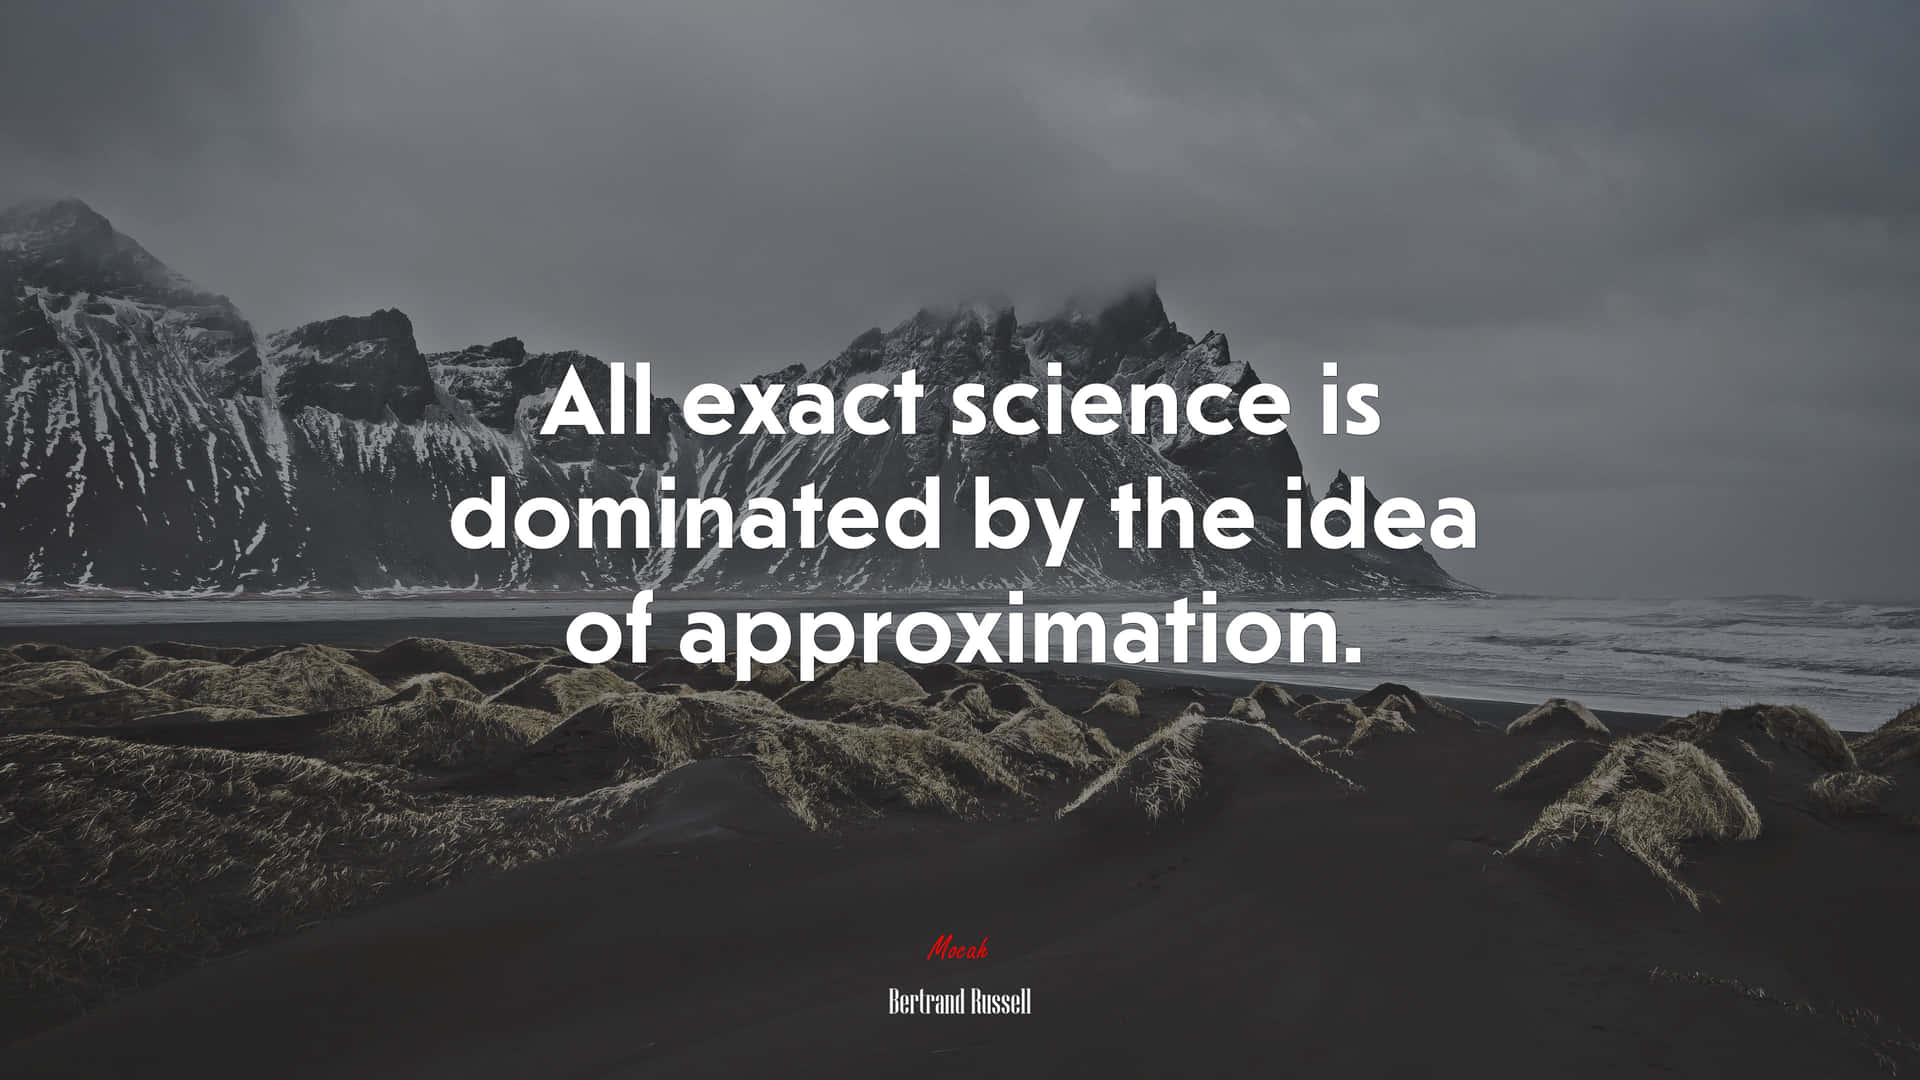 Quote By Bertrand Russell About Exact Science Wallpaper